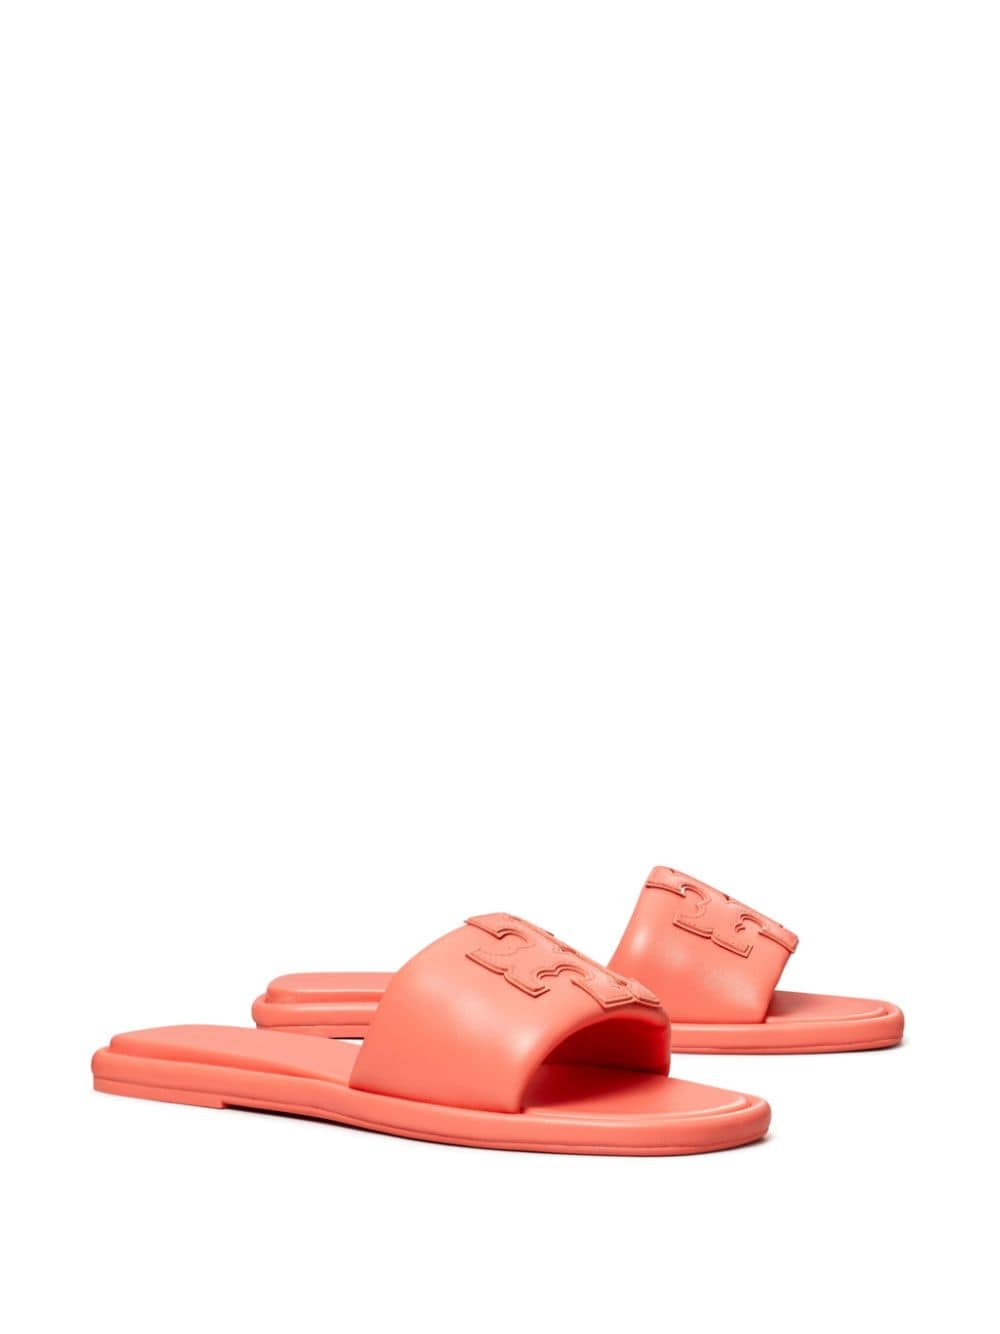 Tory Burch Double T Sport leather sandals - Oranje